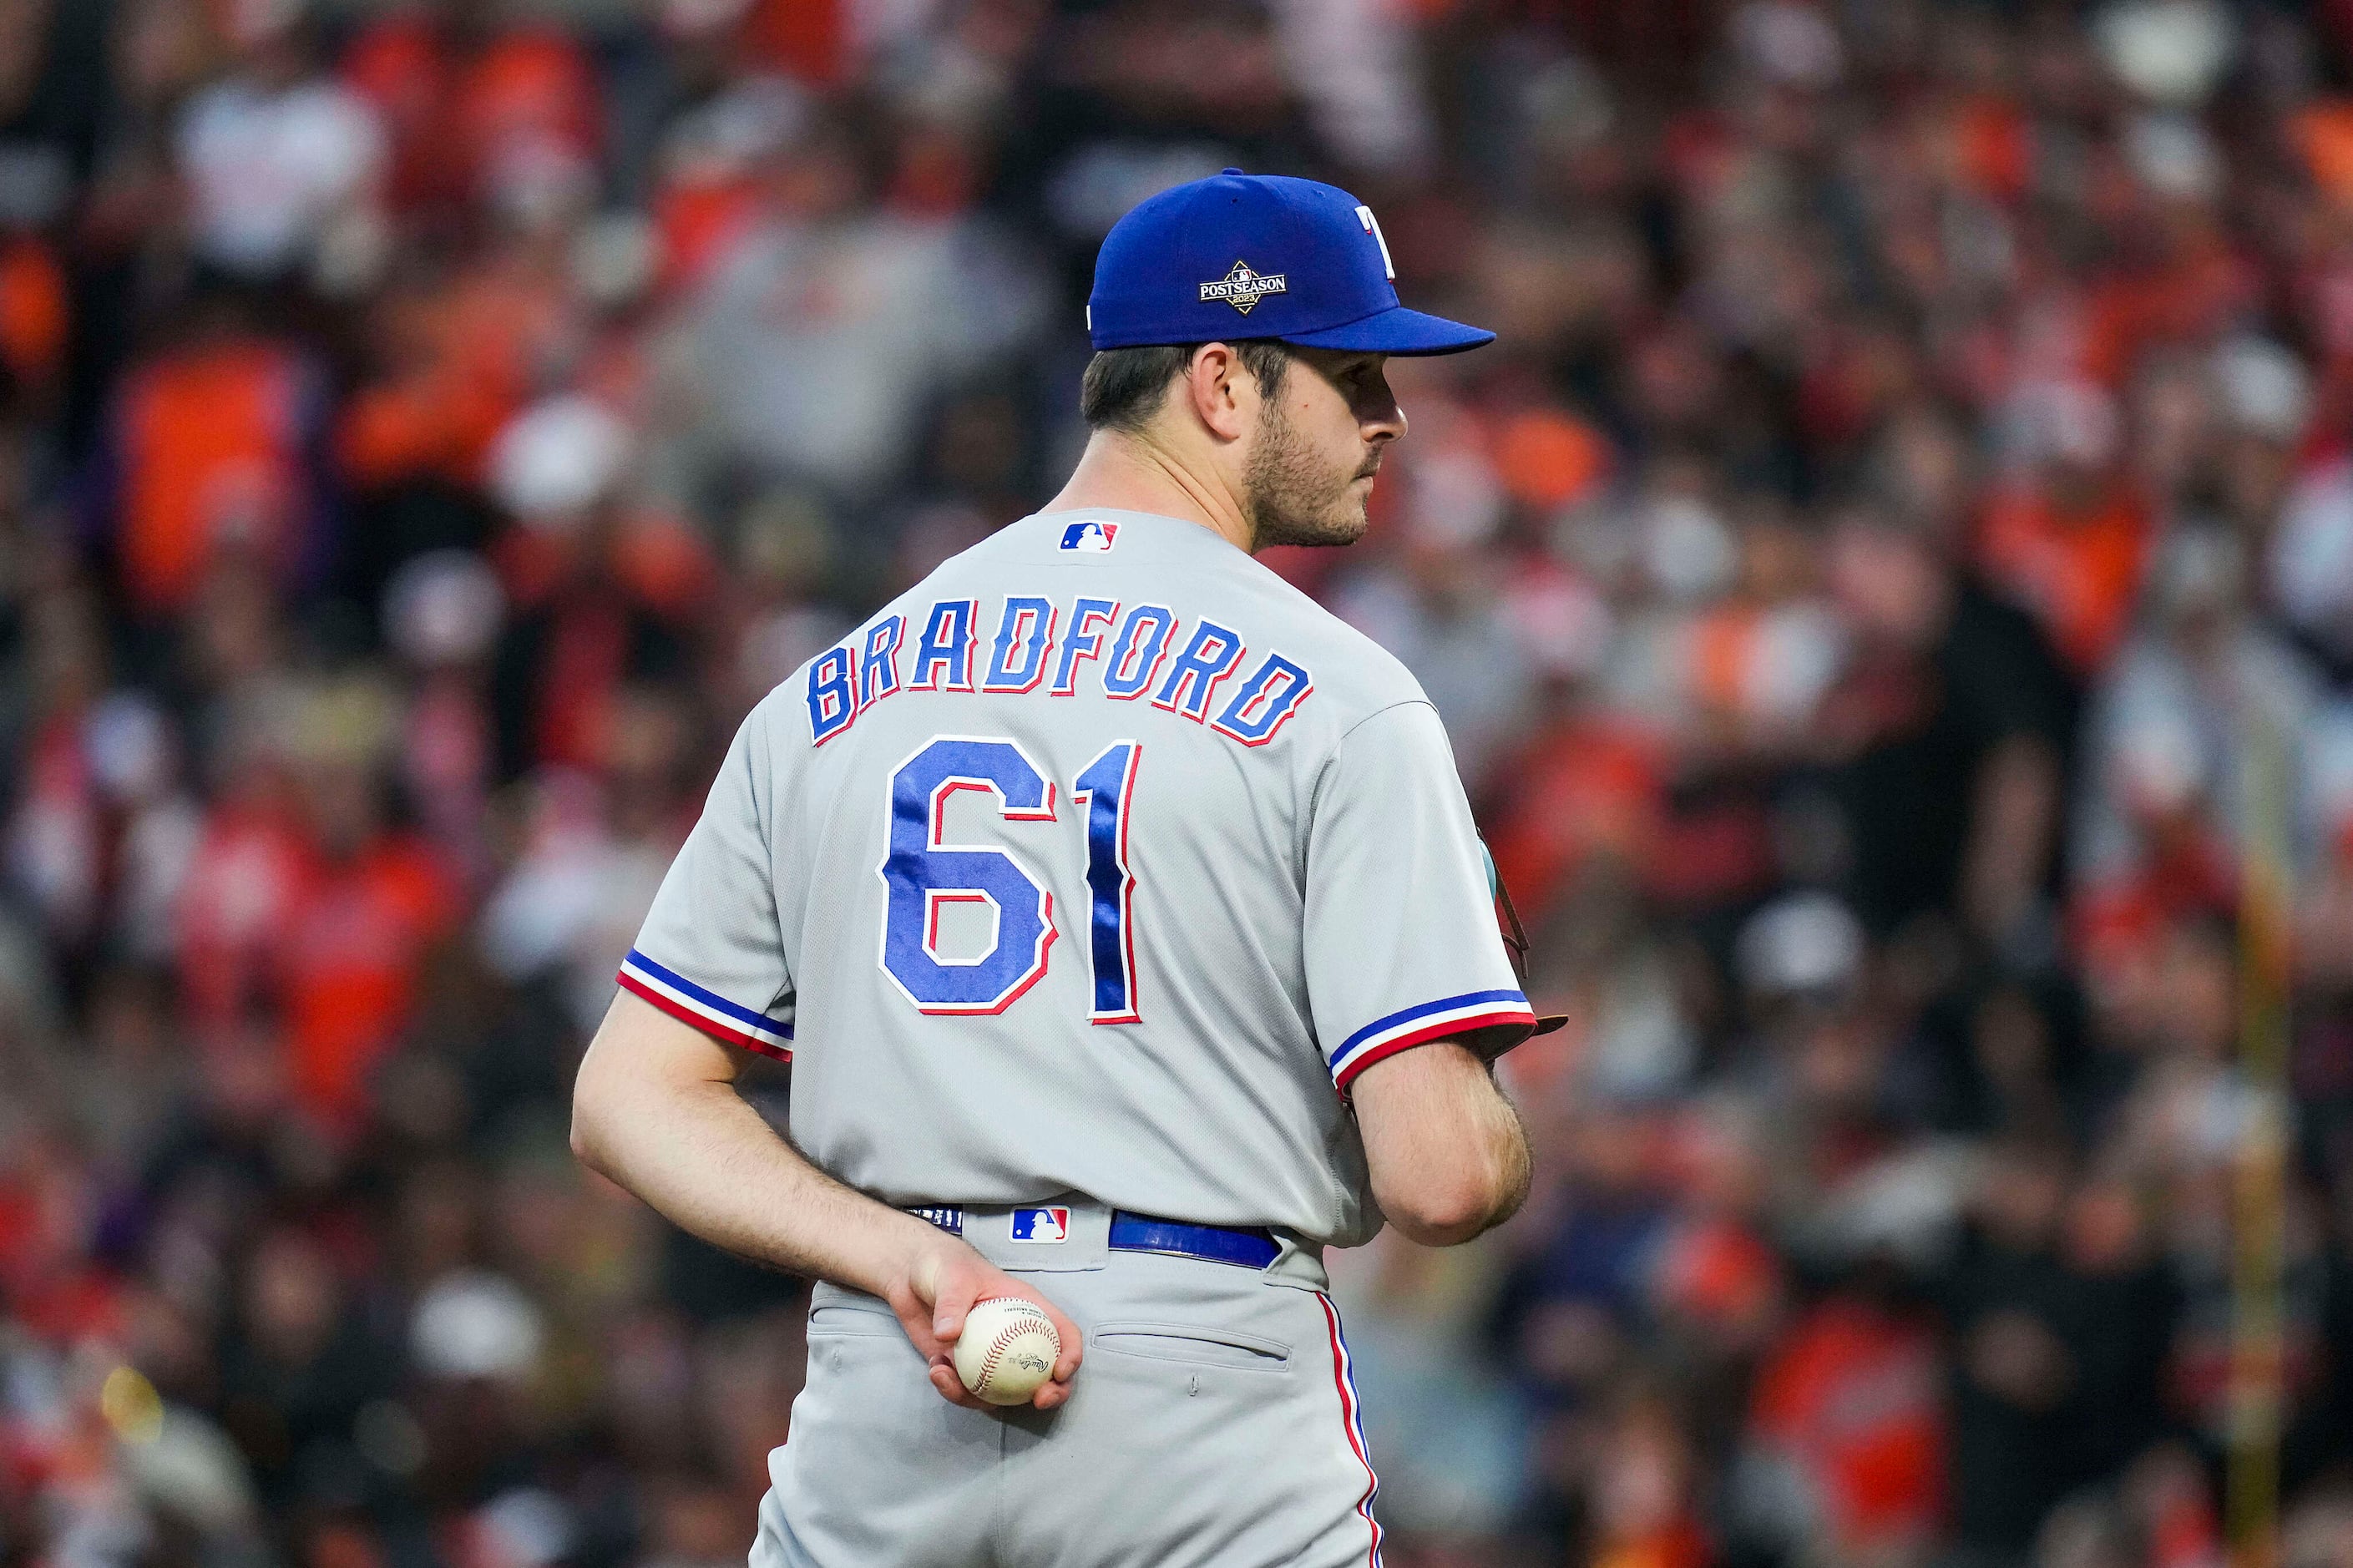 Cody Bradford, the Rangers' home-grown rookie, closes out Orioles to seal  Game 2 win